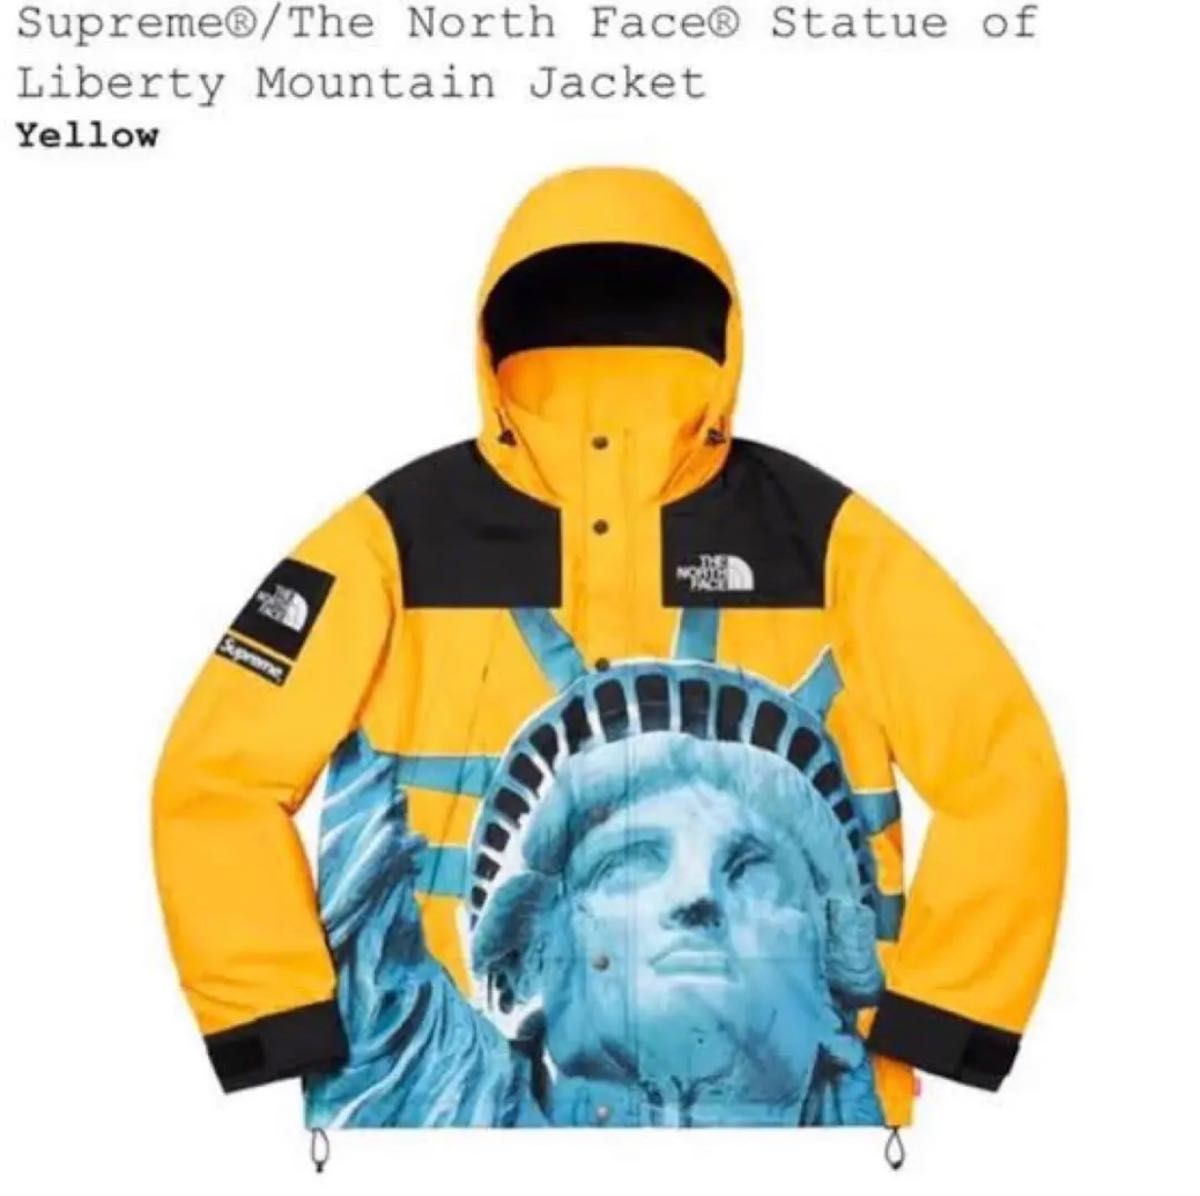 Supreme / The North Face Statue of Liberty Mountain Jacket｜PayPay